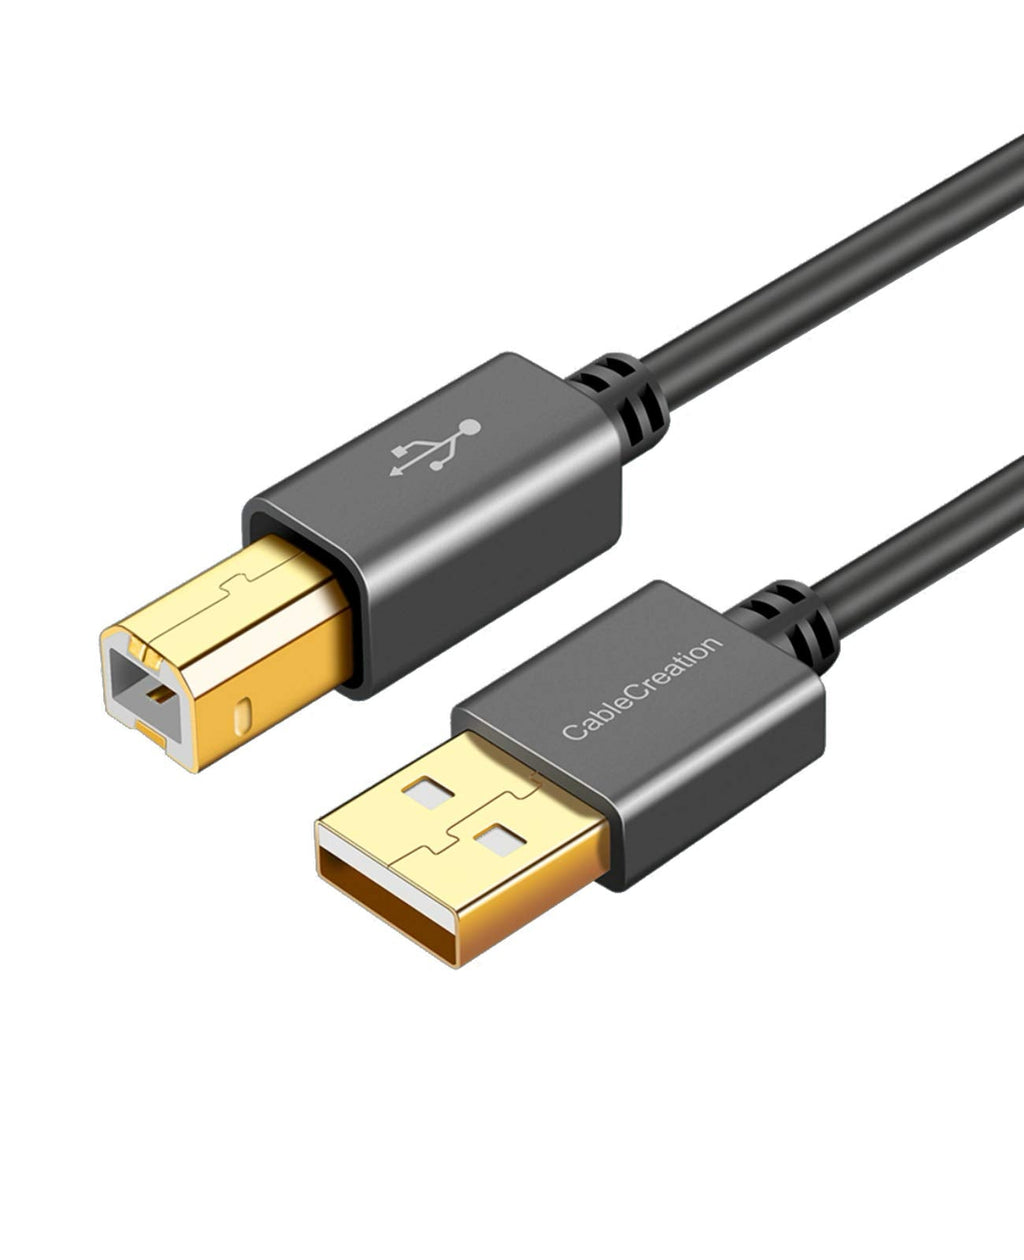  [AUSTRALIA] - USB Printer Cable, CableCreation USB 2.0 A Male to B Male Scanner Cord, Compatible with HP, Cannon, Brother, Dell, Xerox, Samsung and More, 15 FT, Black 15ft